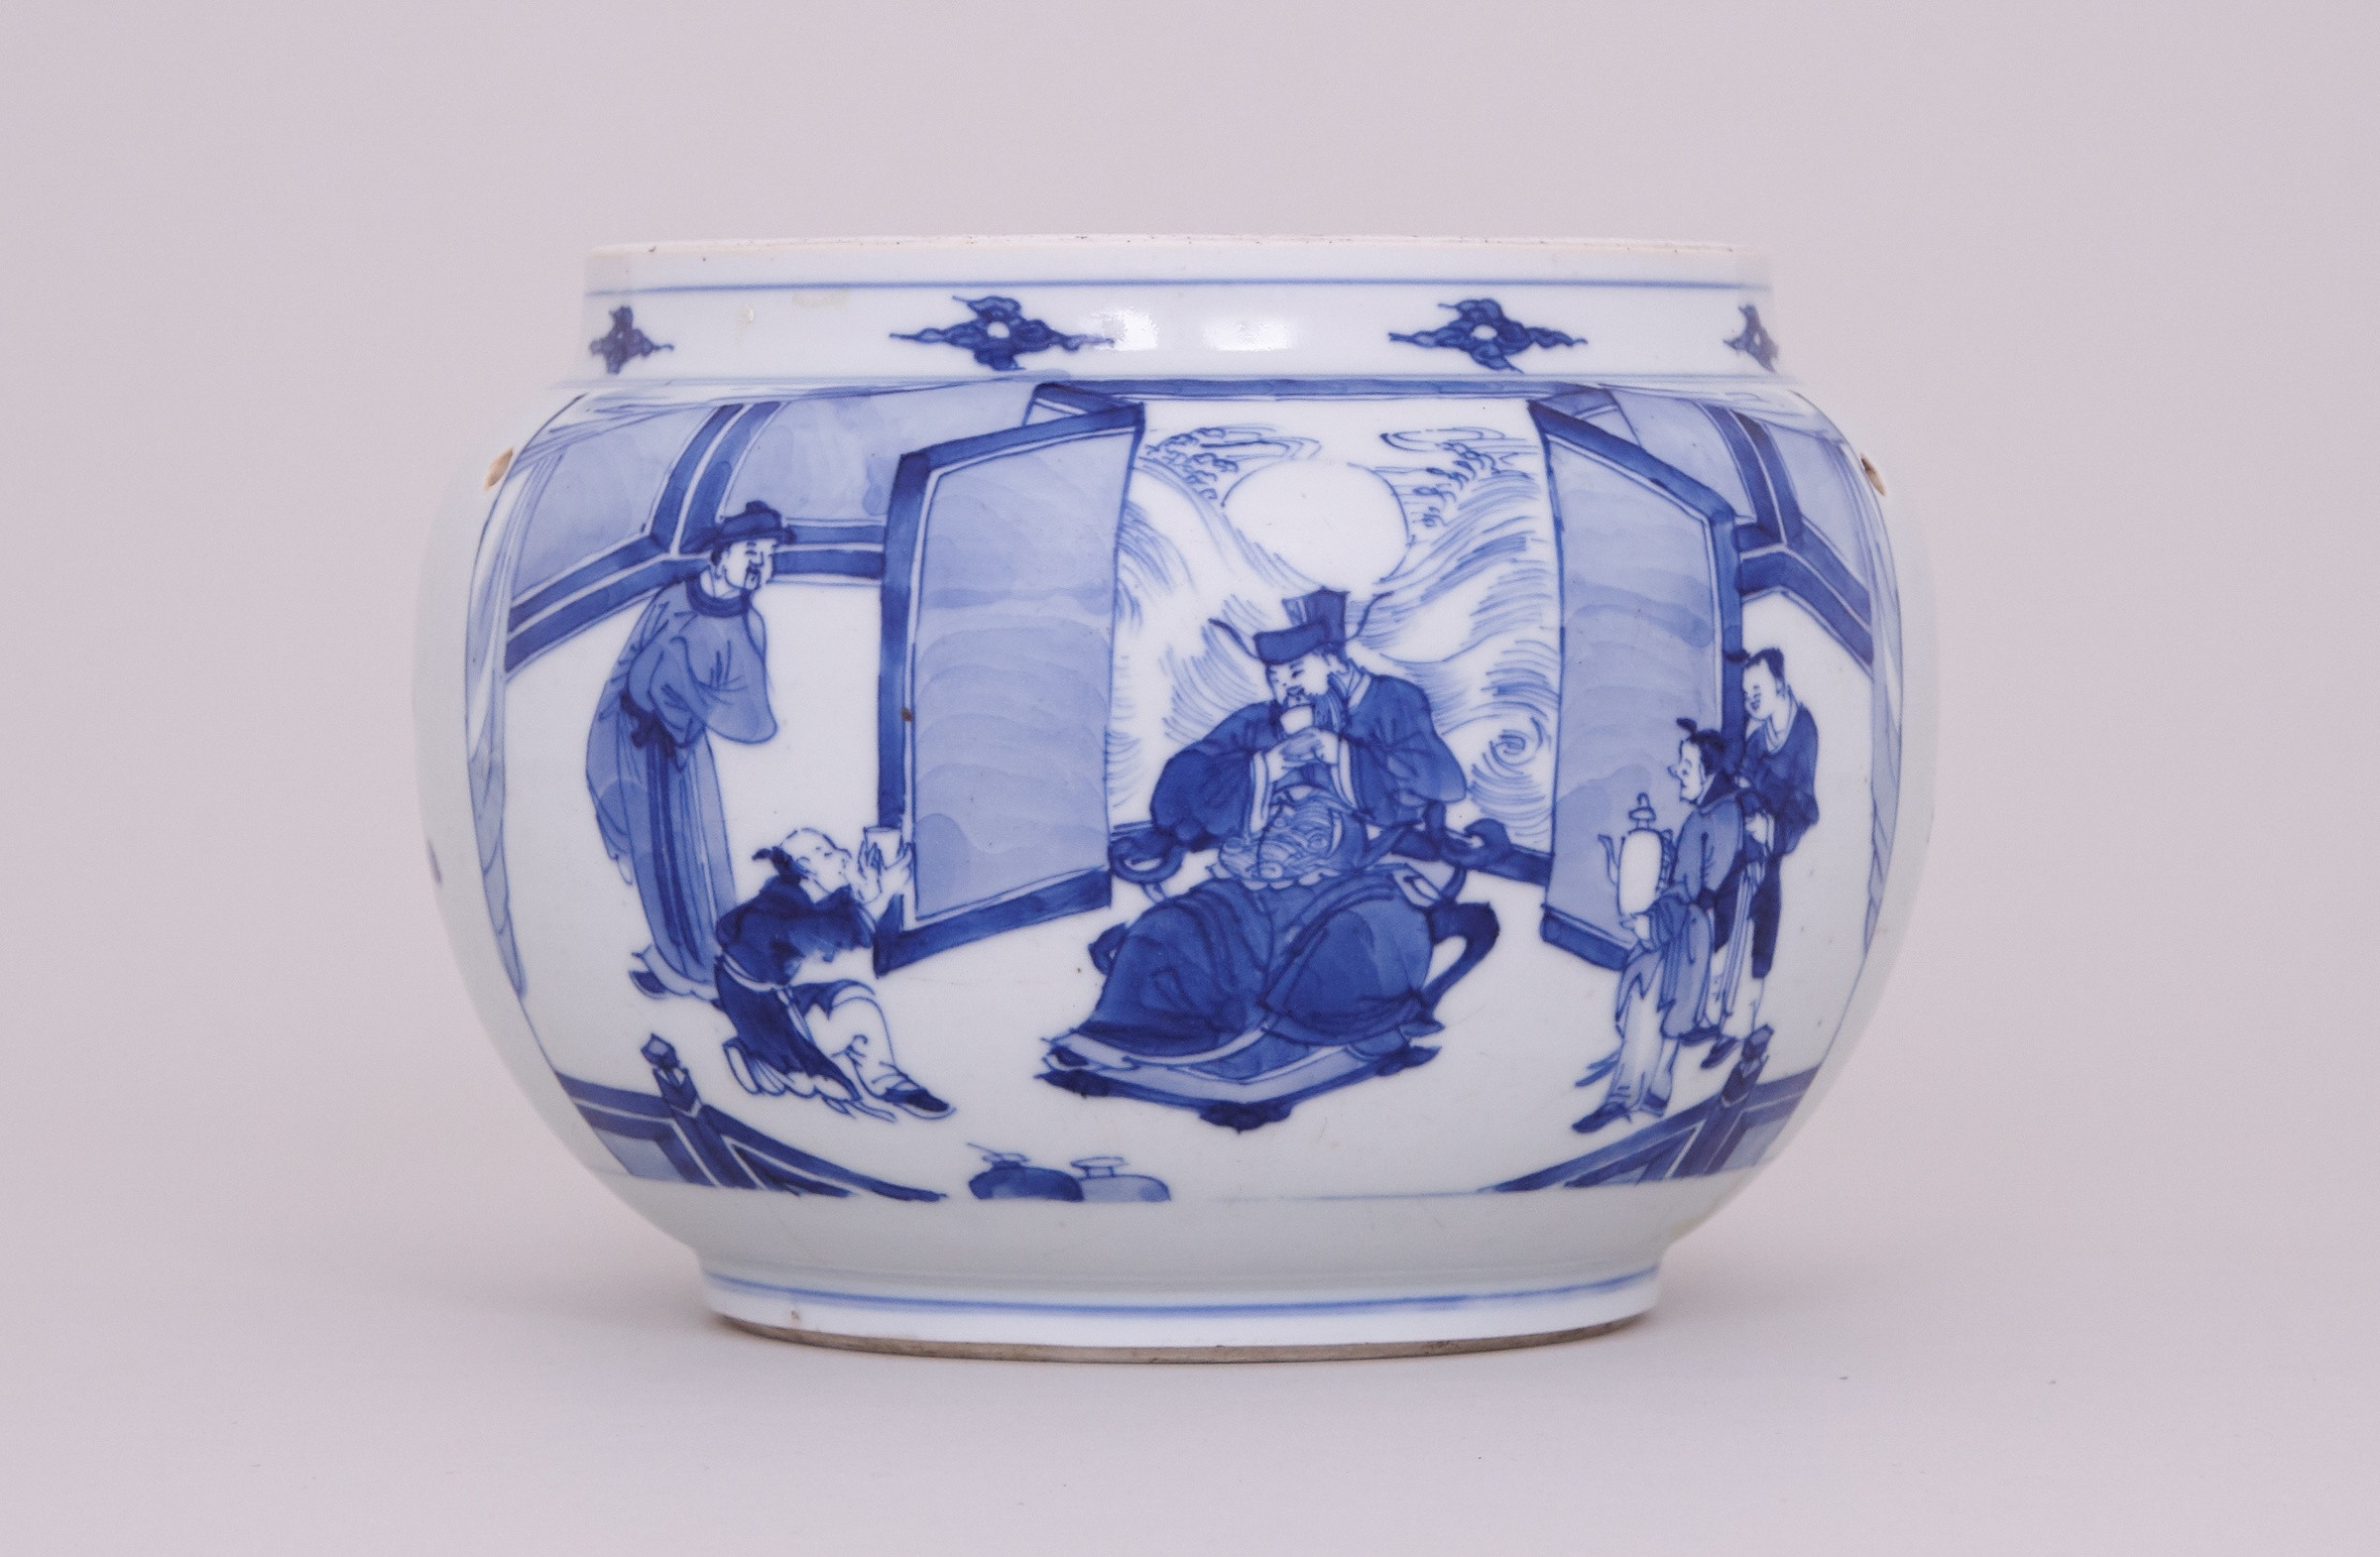 21 Lovable Blue and White Jars and Vases 2023 free download blue and white jars and vases of a chinese blue and white jar kangxi 1662 1722 anita gray for a chinese blue and white jar